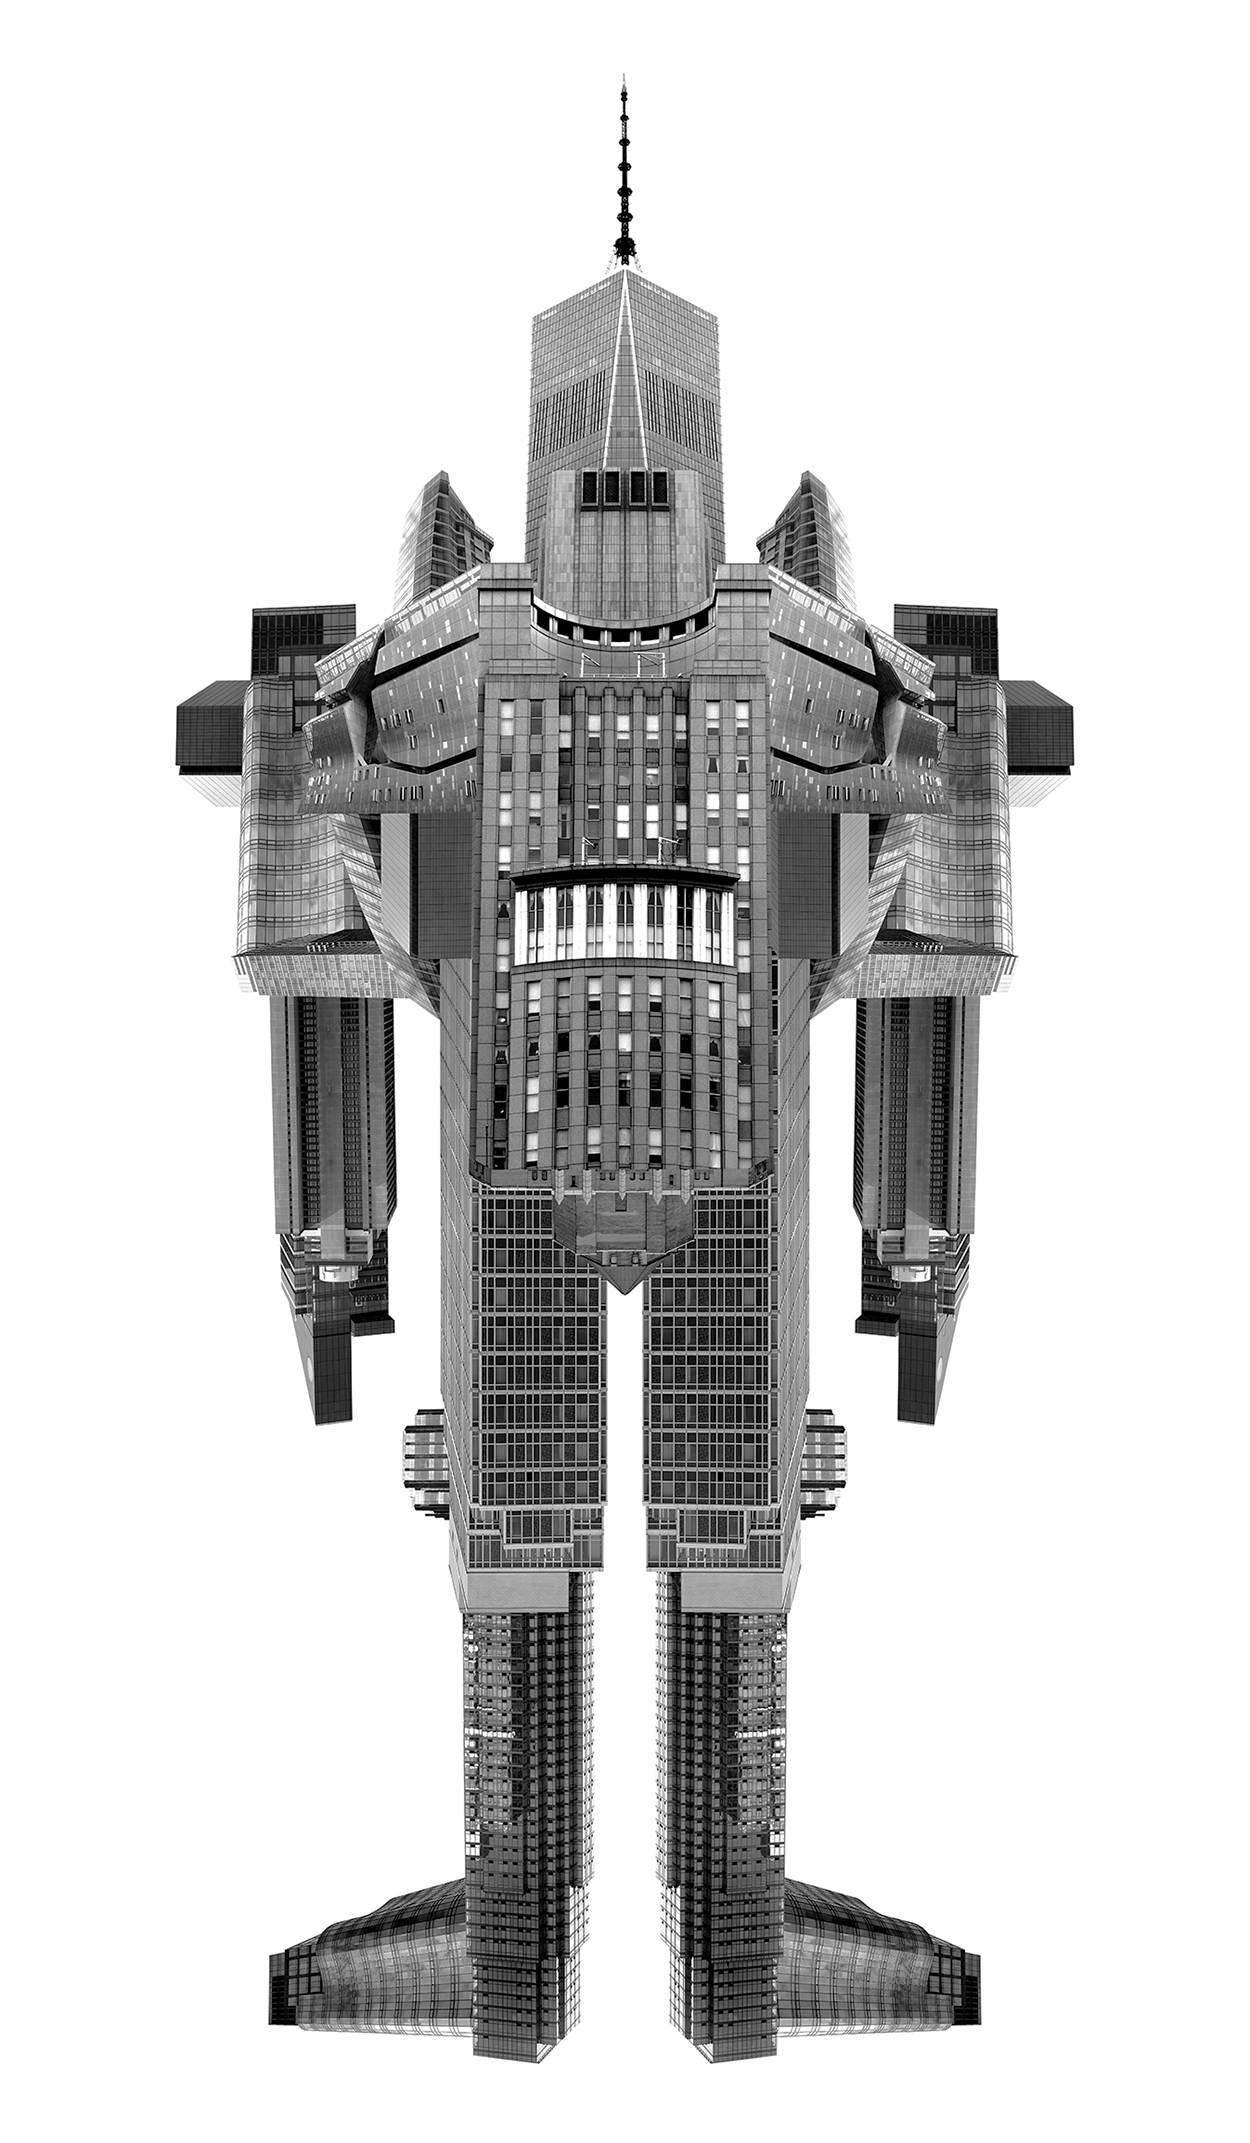 Joel Kuntz Black and White Photograph - Robot made with iconic buildings of New York, Architectural robot.